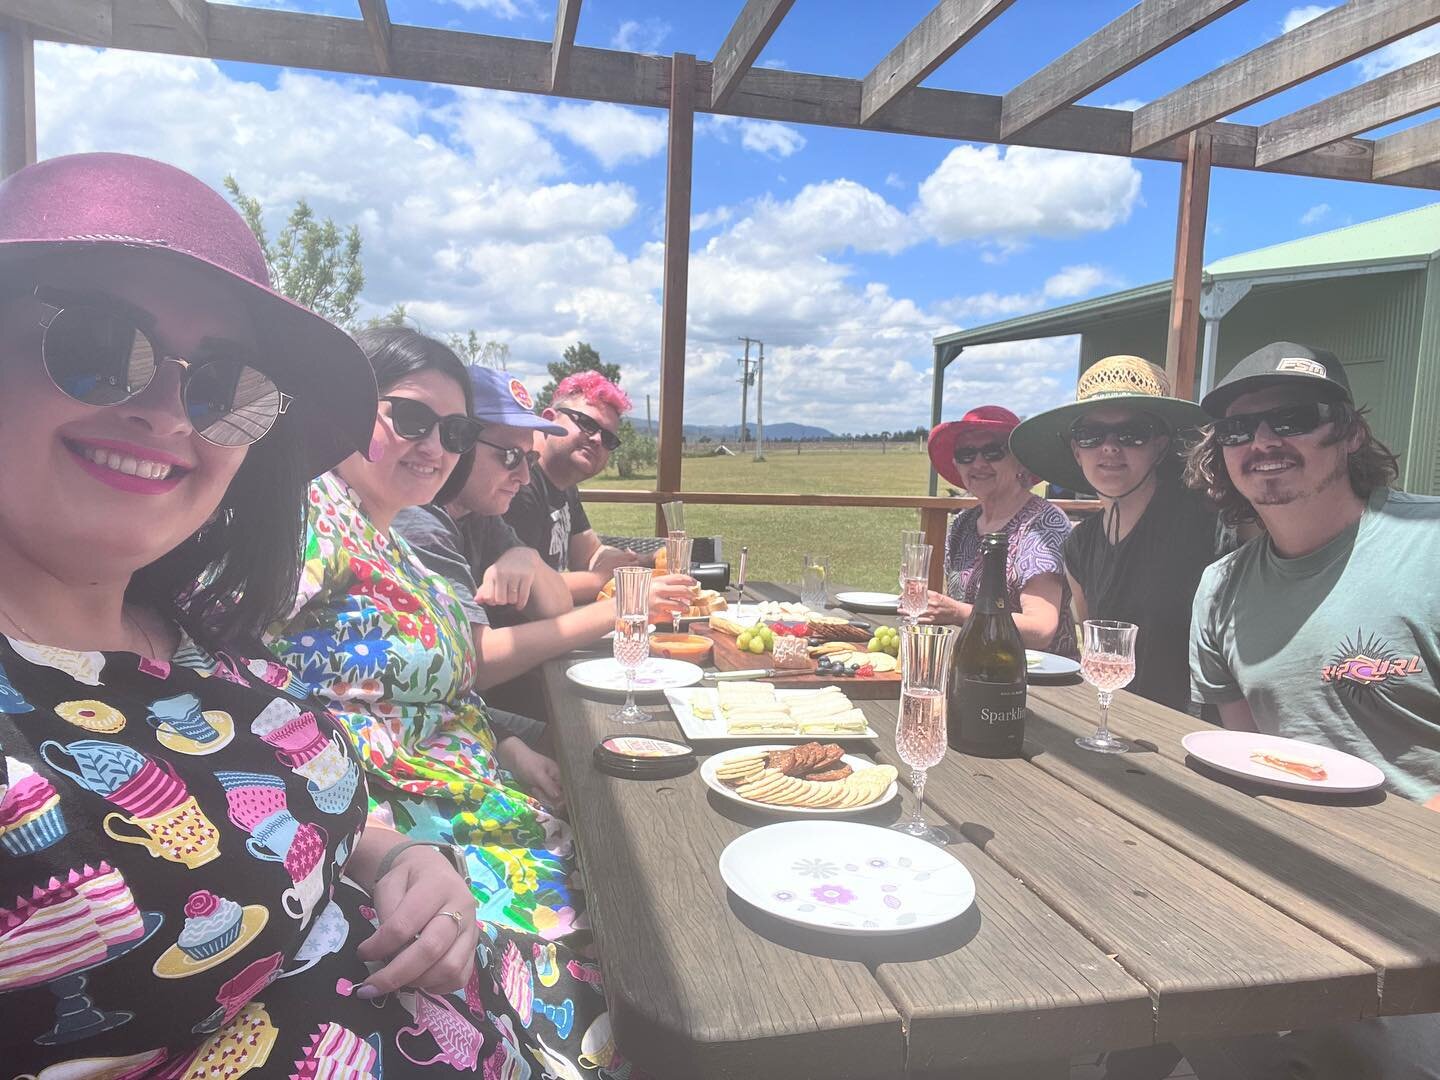 &ldquo;Birthday&rdquo; wine &amp; cheese in the sunshine 

Image: 7 people sitting at a long table in the sunshine on a deck with cheese platter and wine glasses